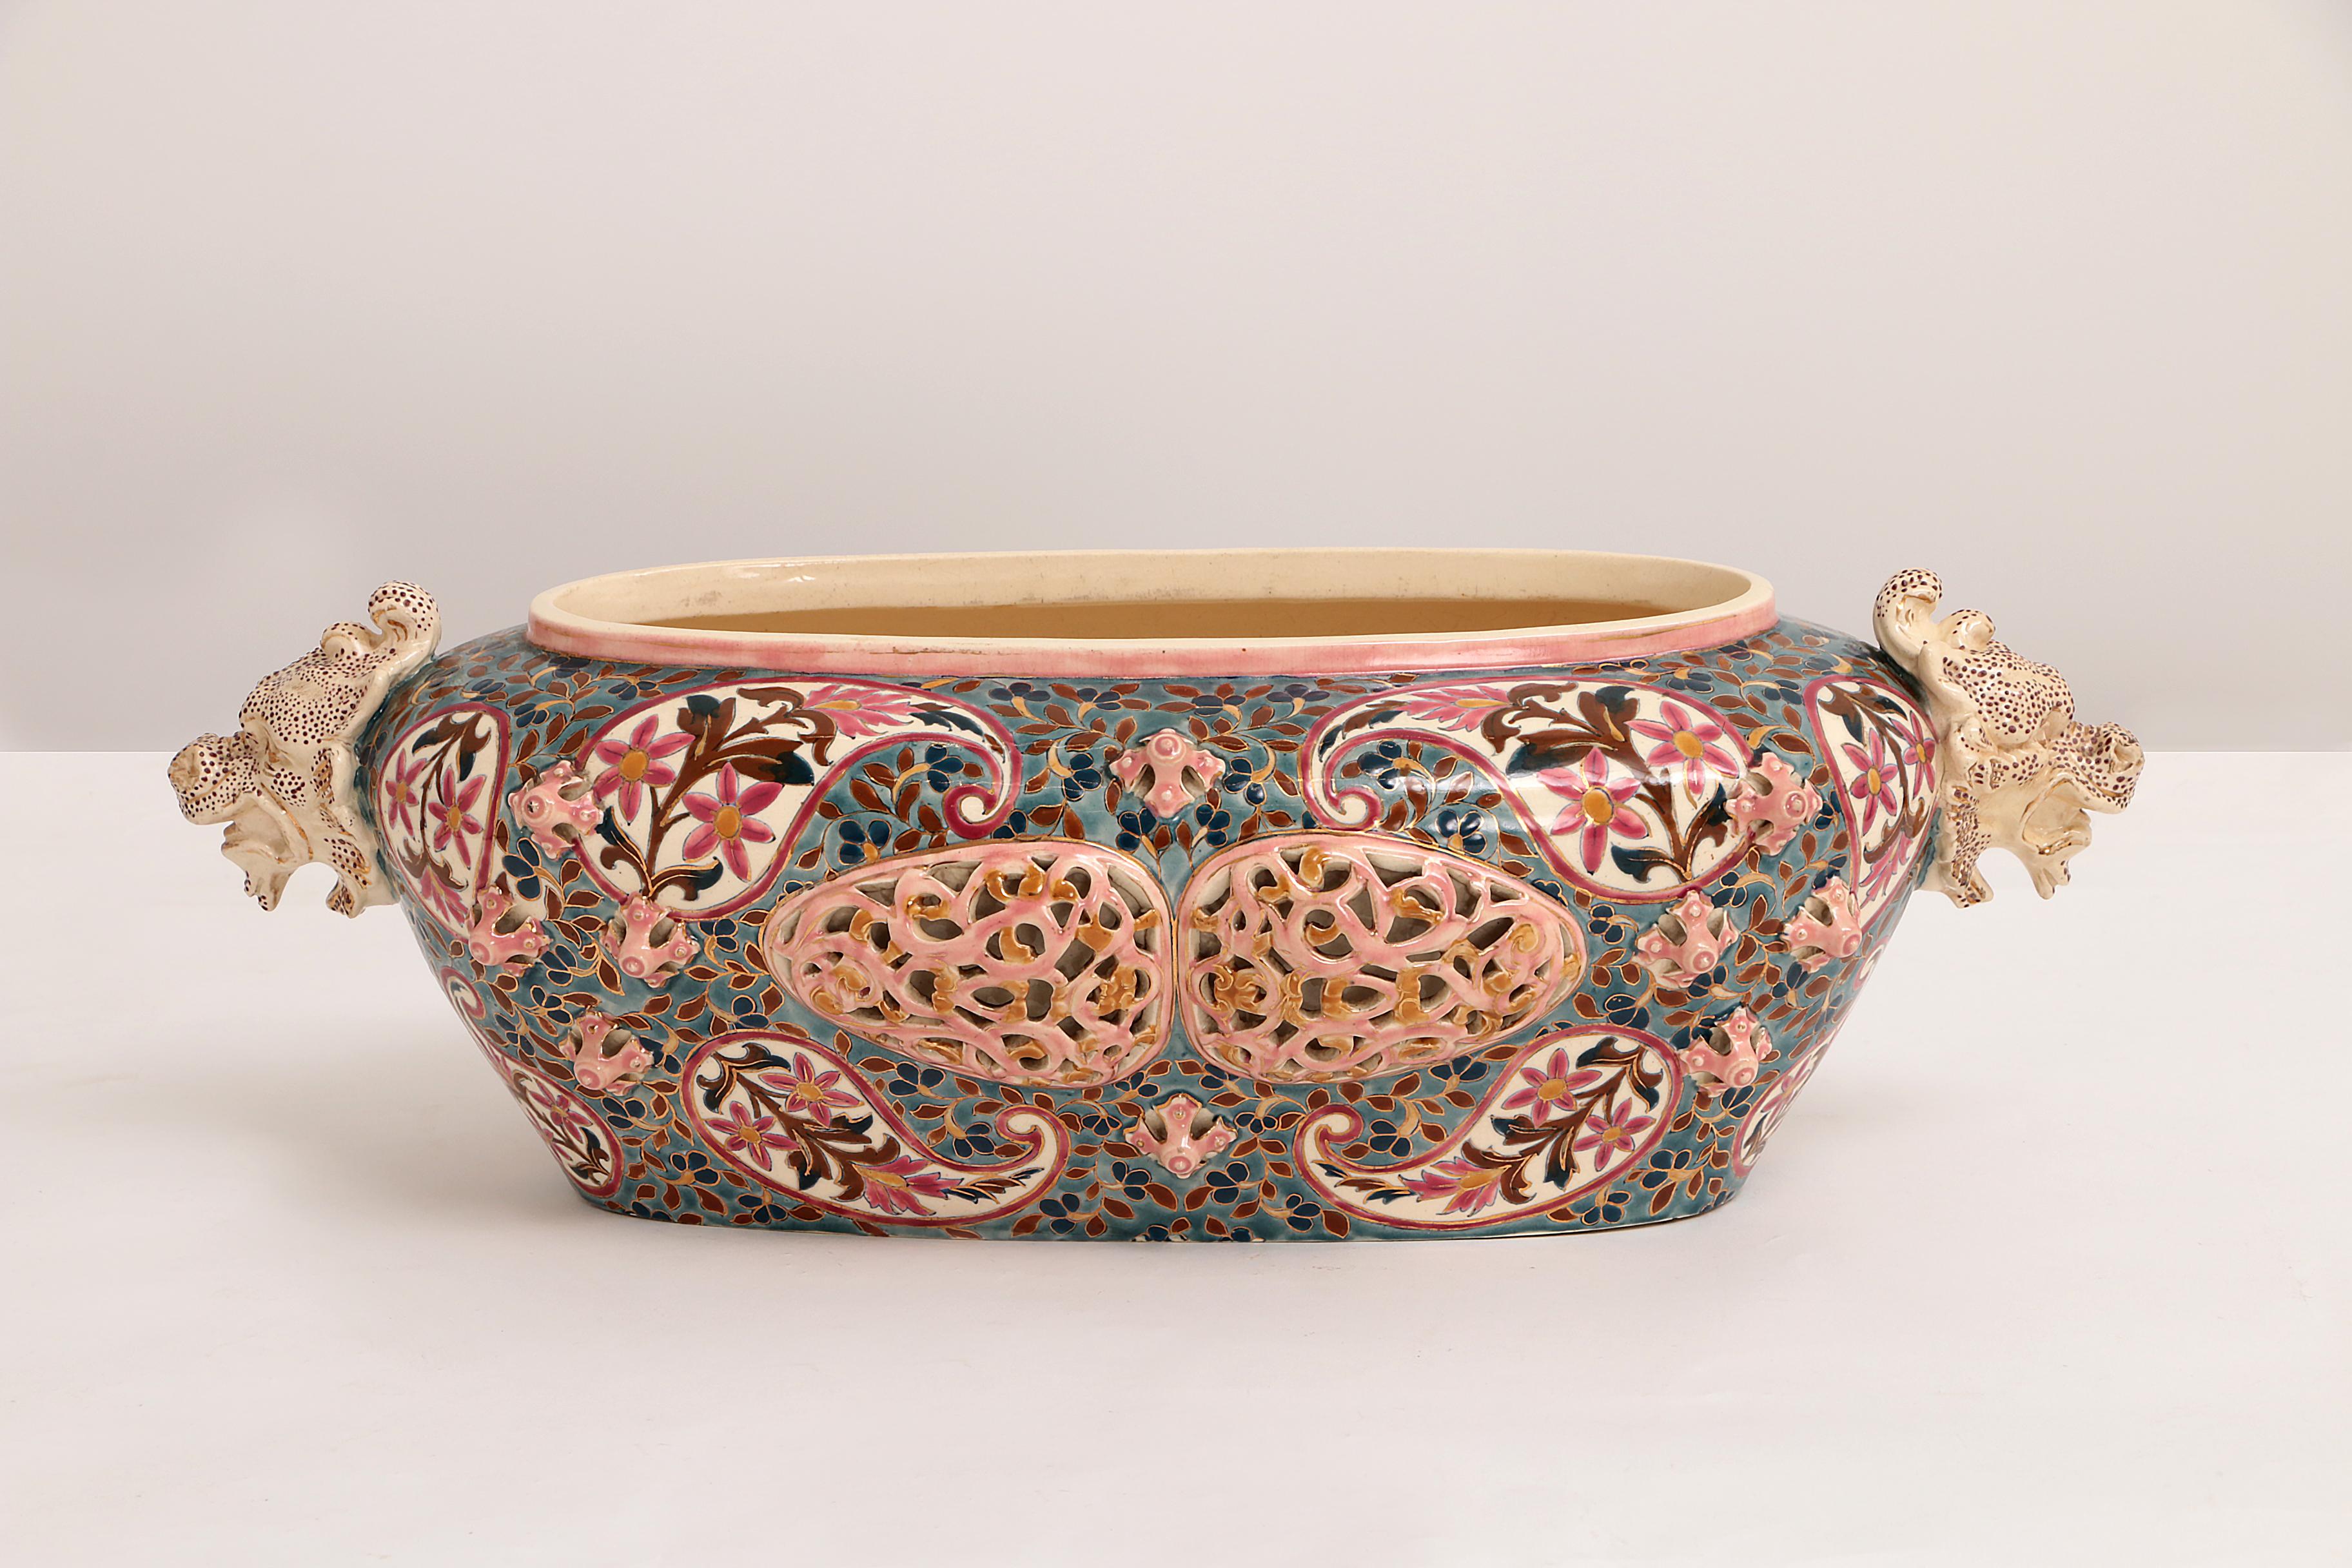 Hungarian Fischer Budapest Bowl with Beautiful Colors and Dragon Heads, 19th Century